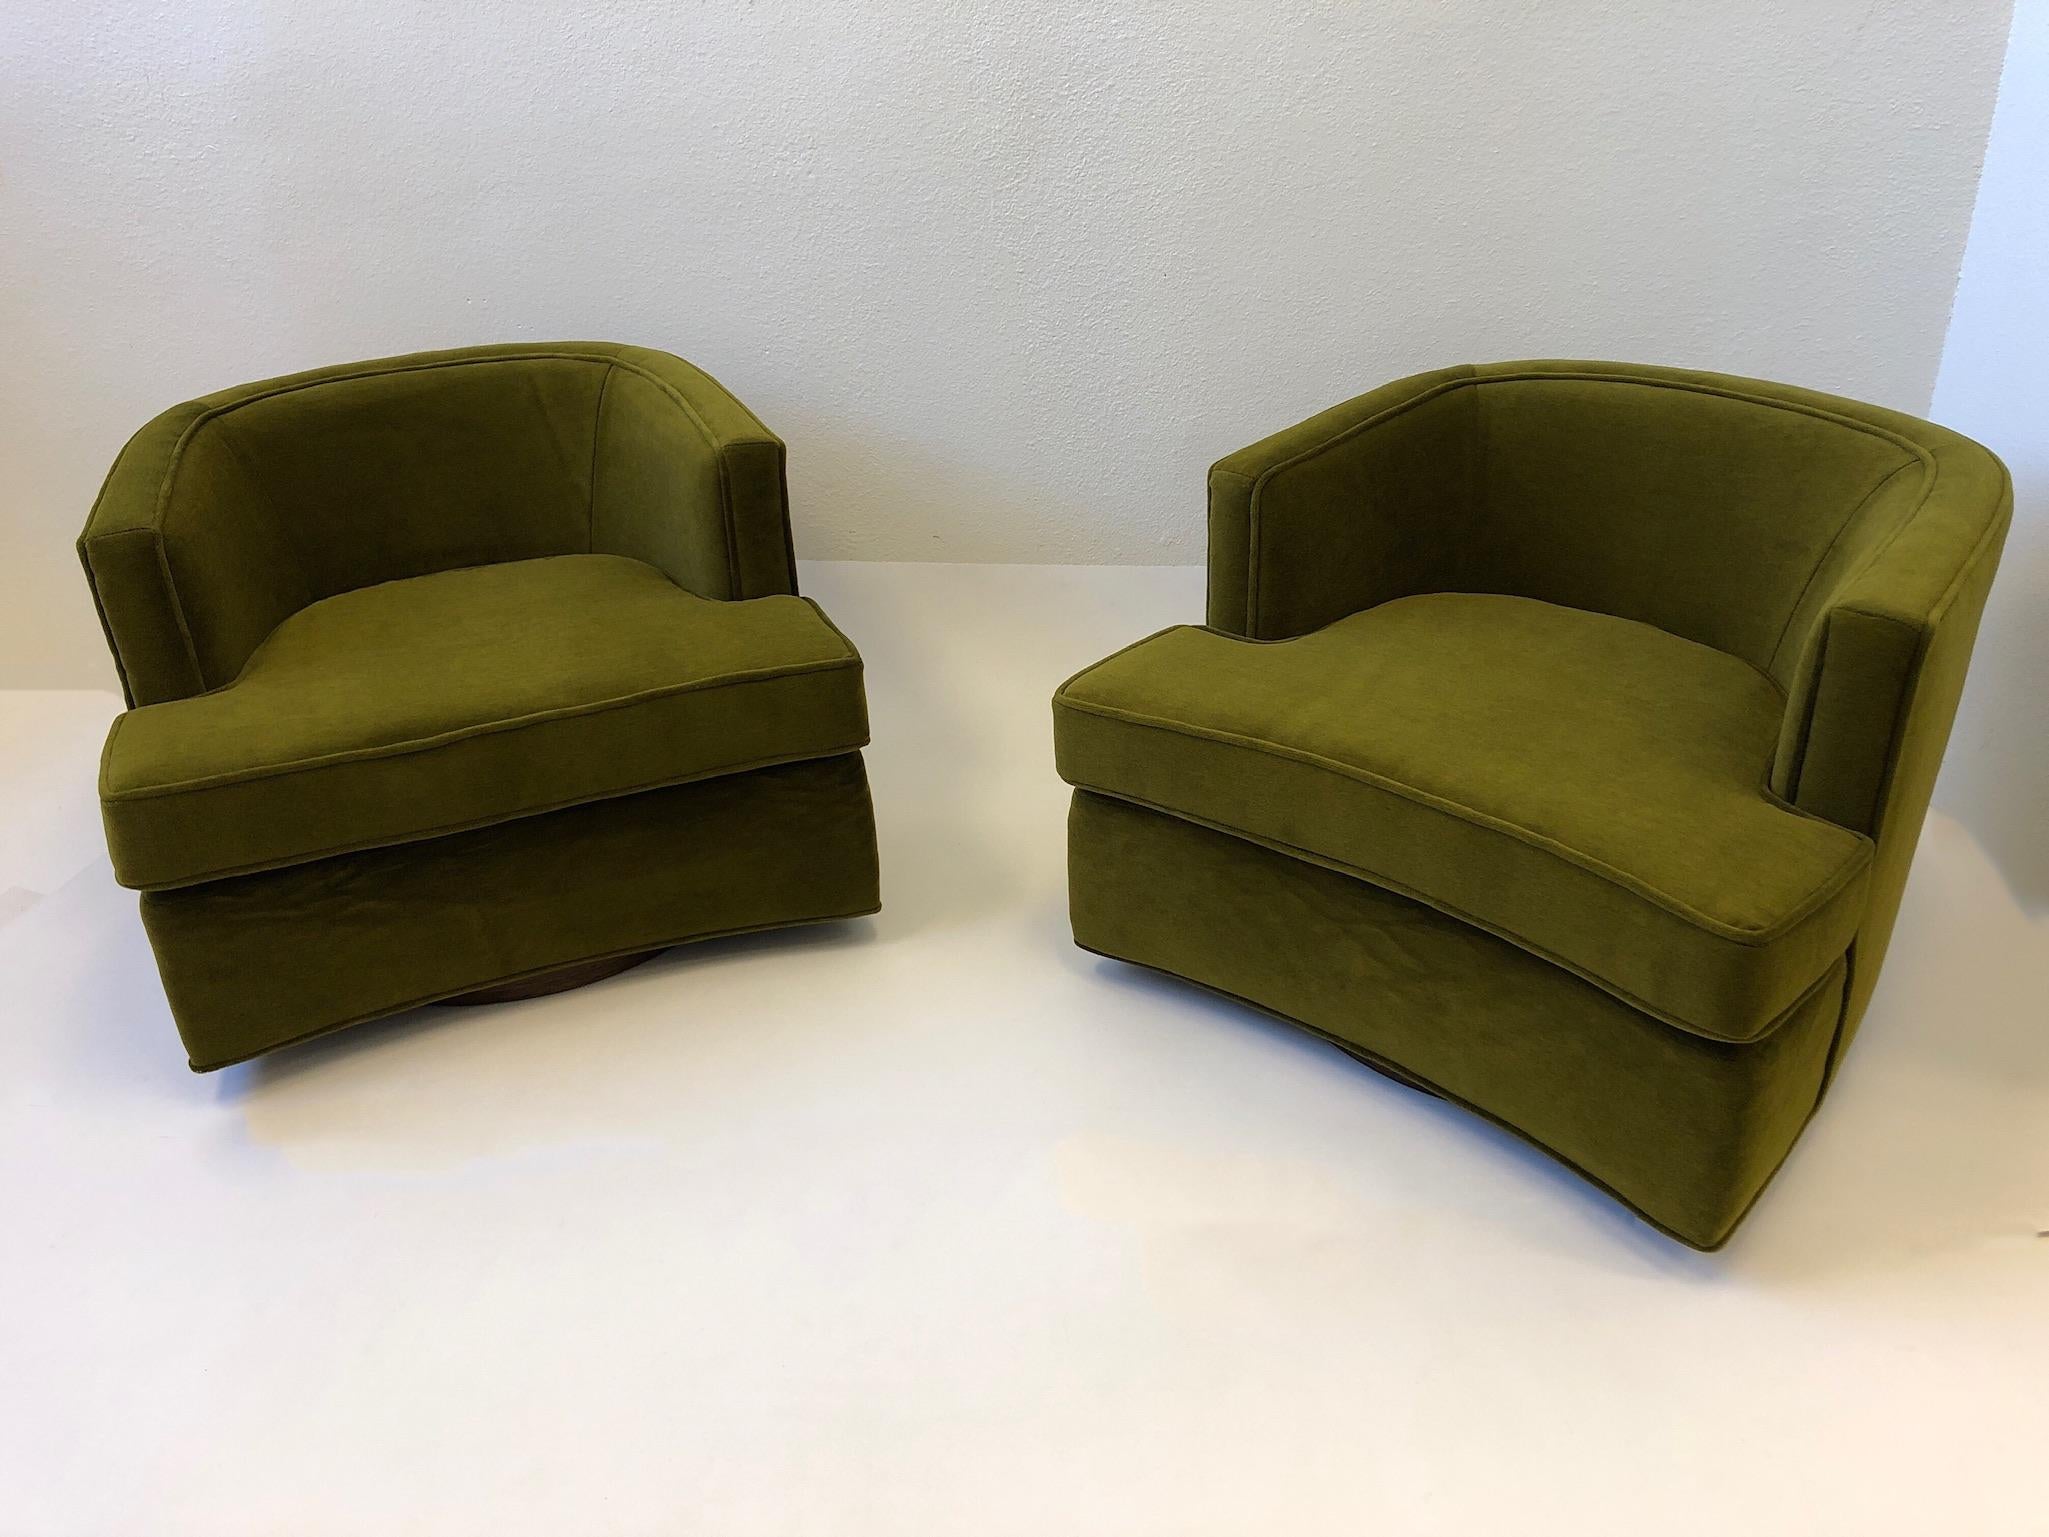 A spectacular pair of swivel lounge chairs designed by Harvey Probber in the 1950s. The chairs have been newly recovered in a beautiful olive green mohair fabric. The base is dark brown stained oakwood. One of the chairs retains the Probber label